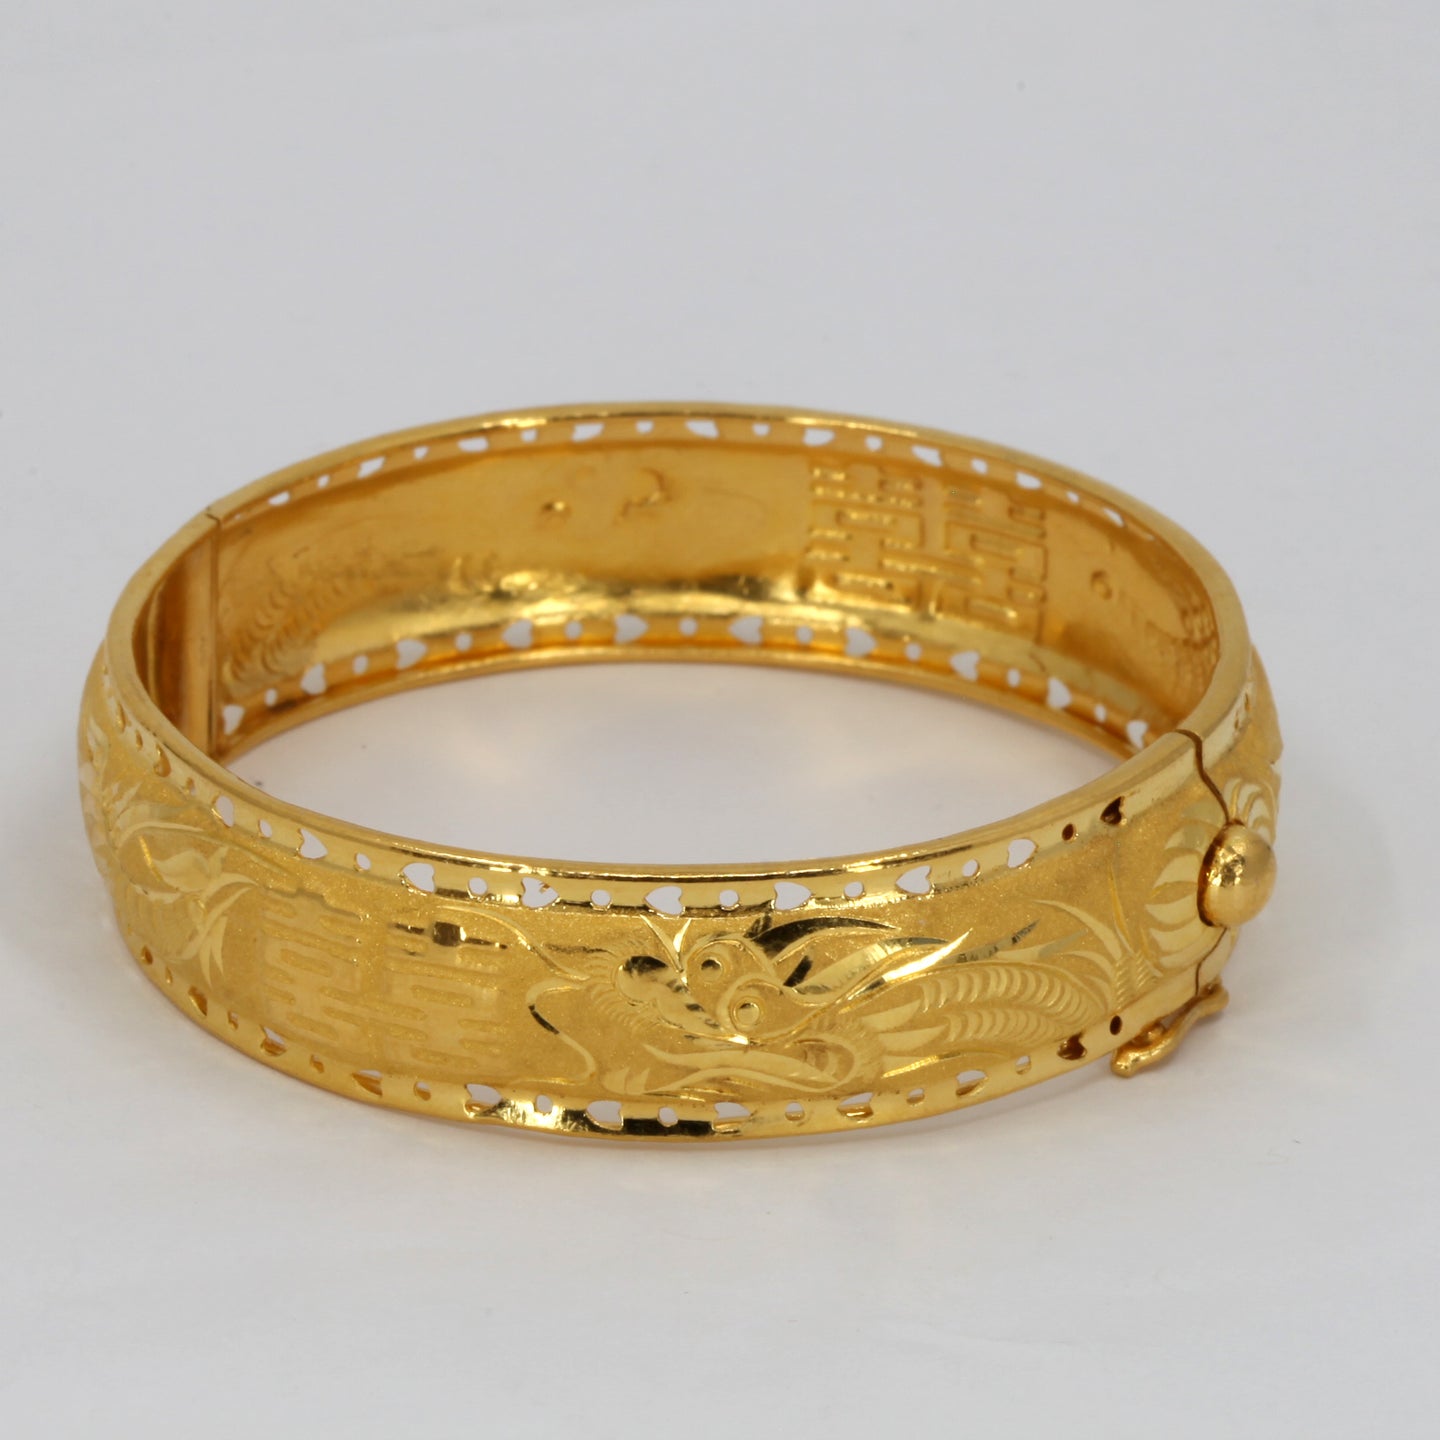 24K Solid Yellow Gold Dragon Phoenix Double Happiness Bangle 22.77 Grams 9999